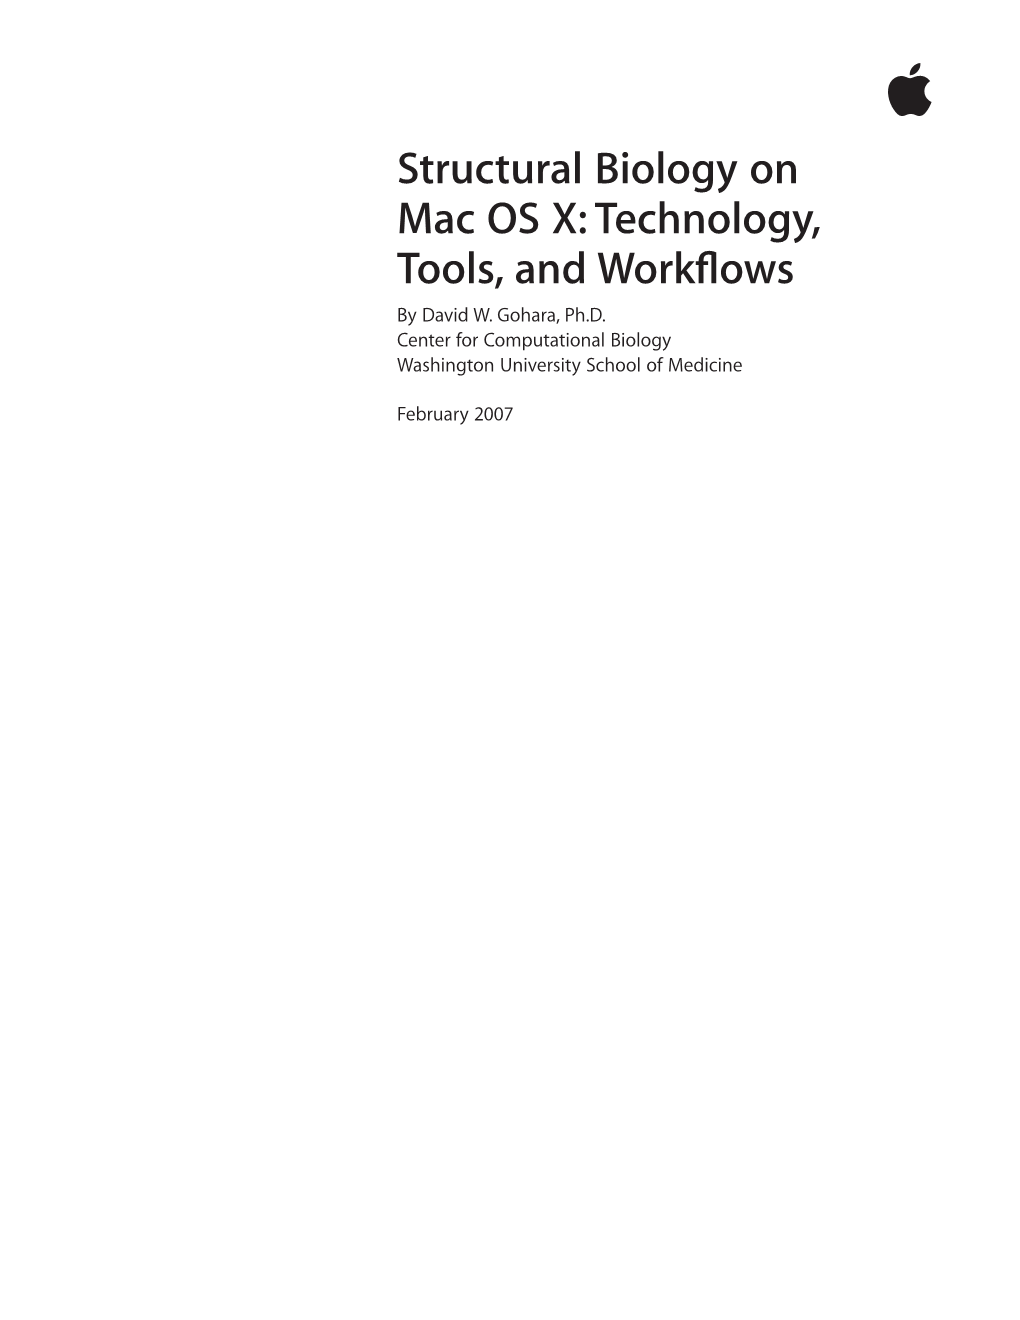 Structural Biology on Mac OS X: Technology, Tools, and Workflows by David W